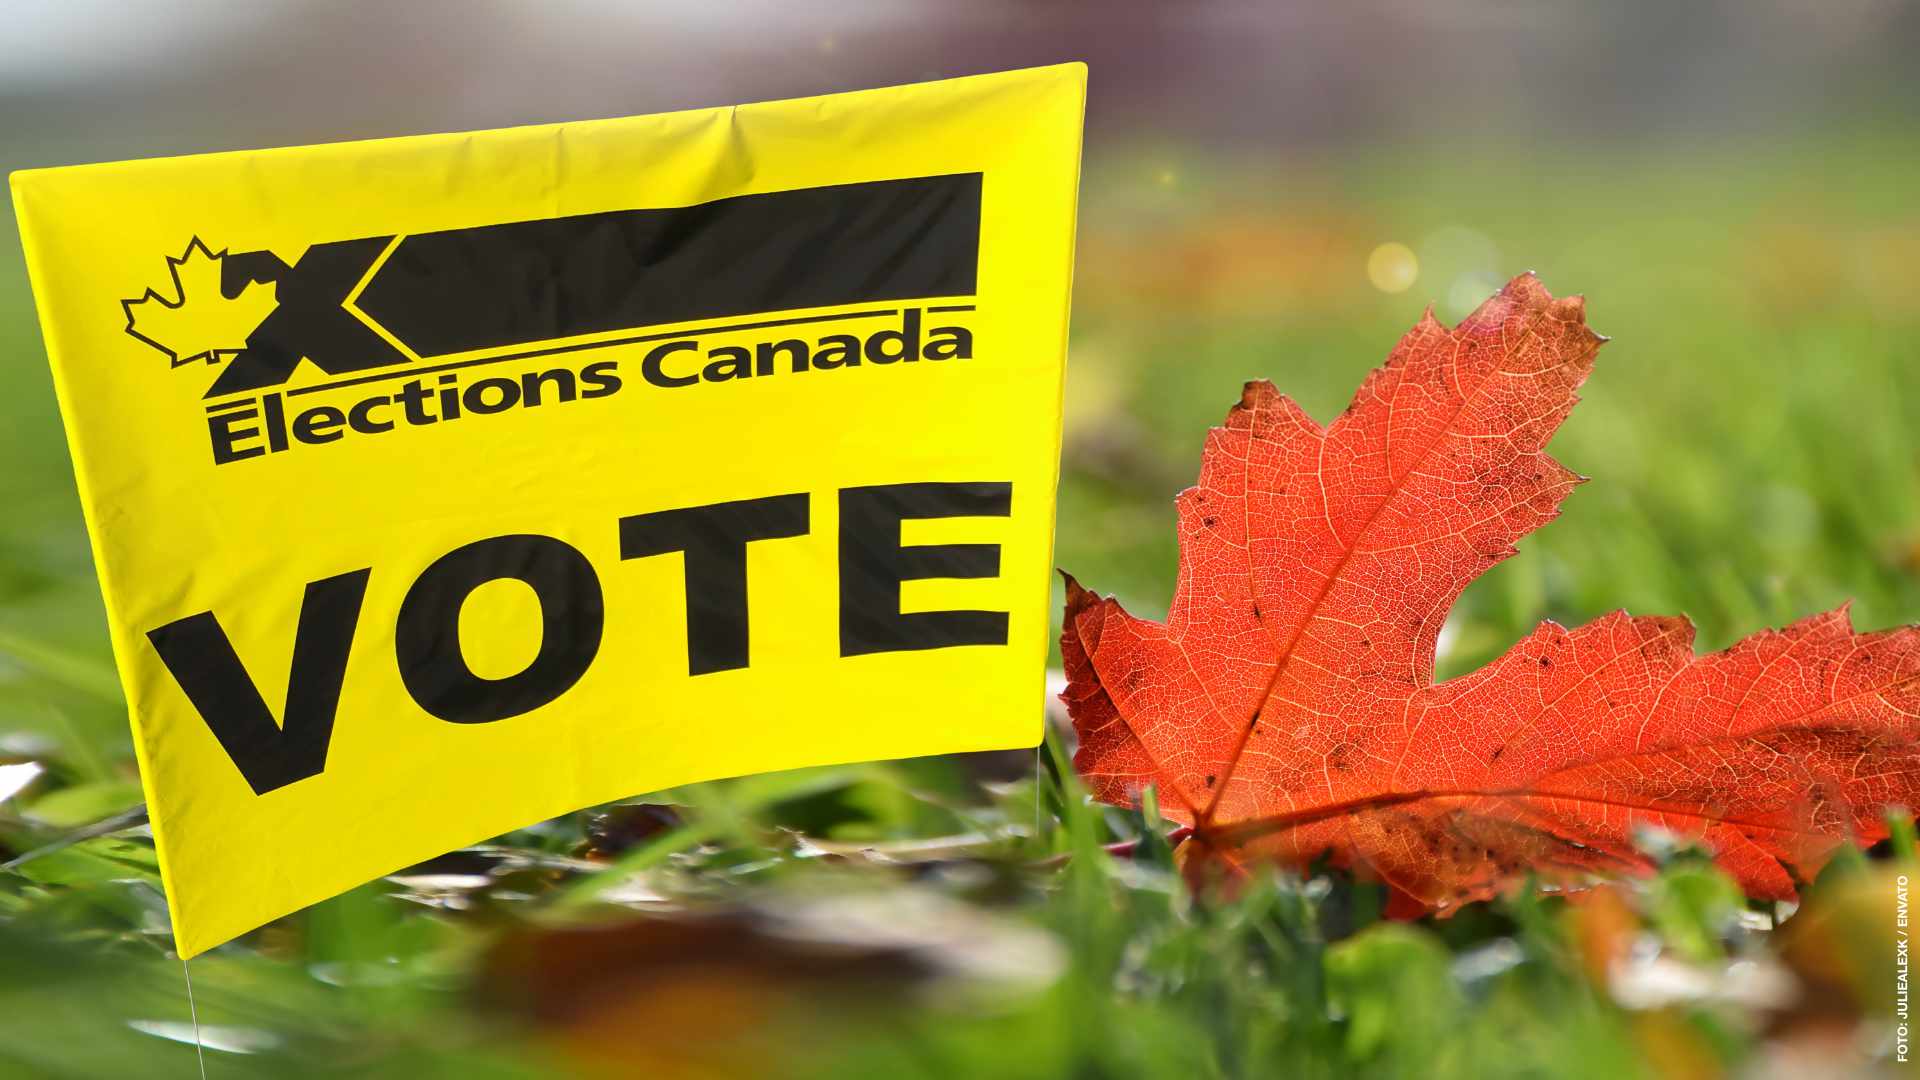 Yellow Elections Canada Vote sign with red maple leaf on green grass with selective focus